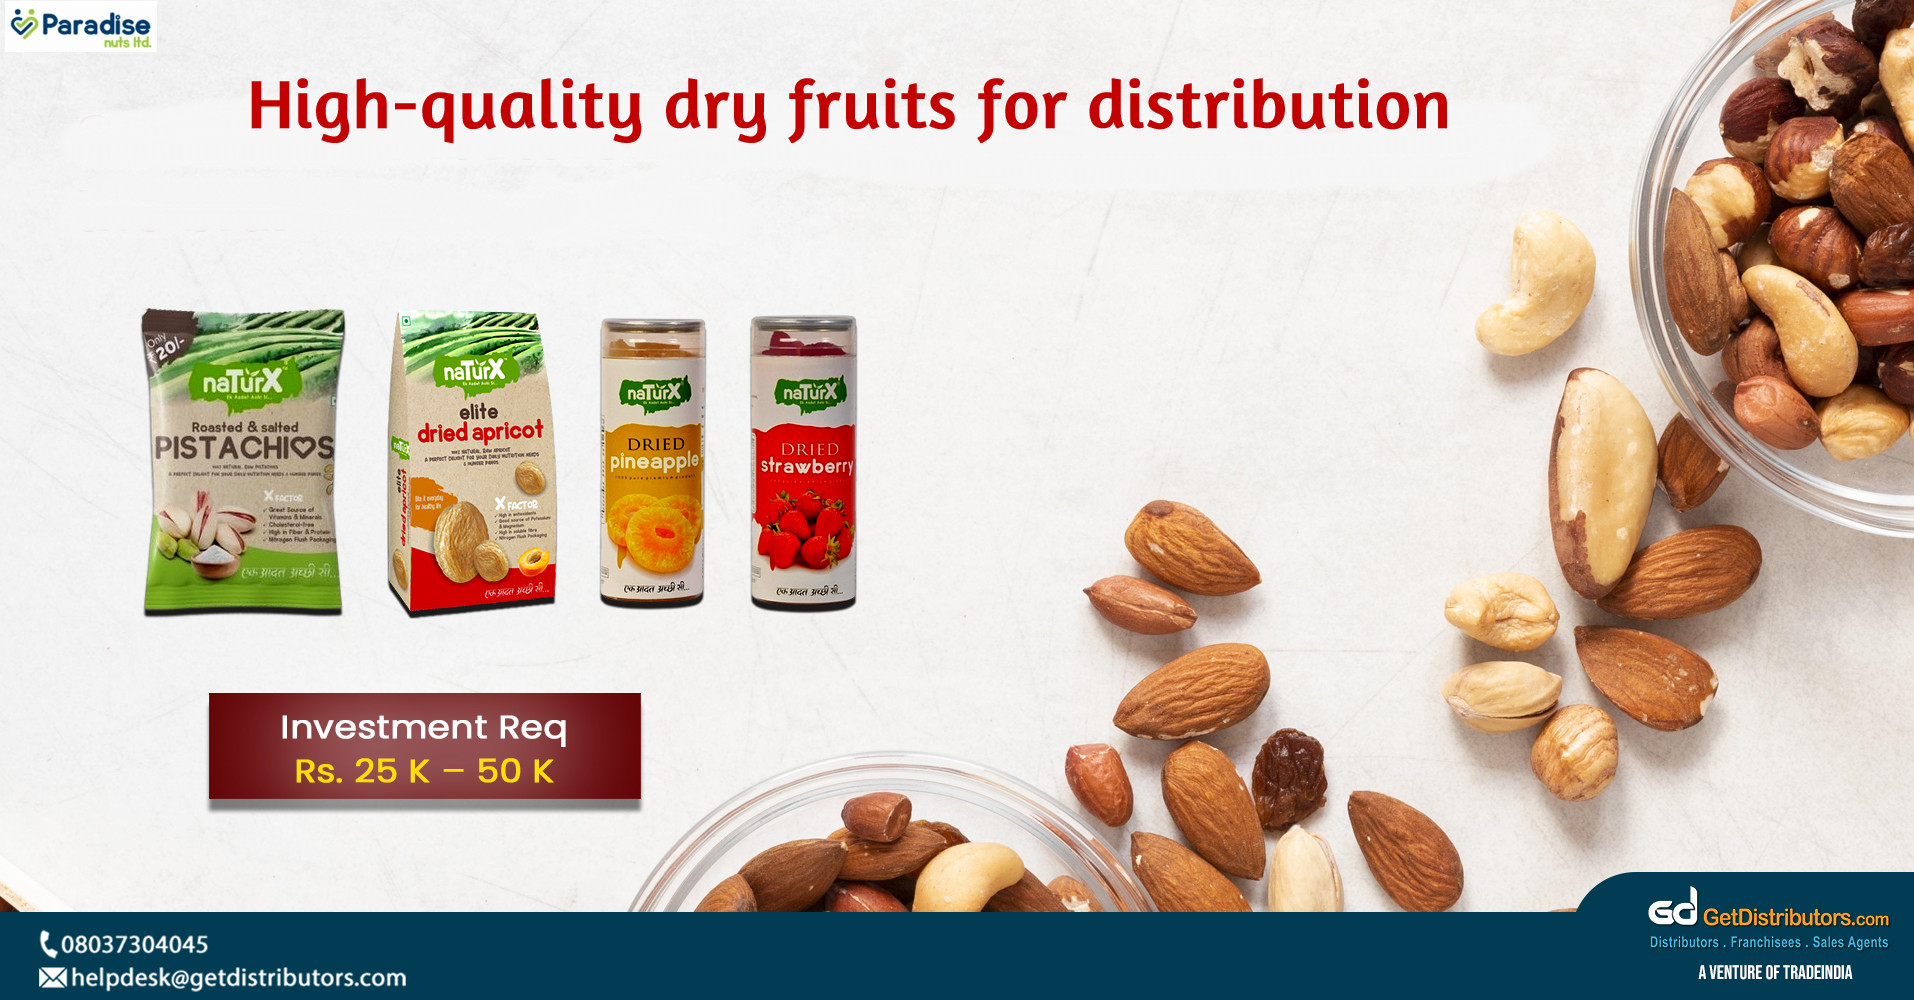 High-quality dry fruits for distribution